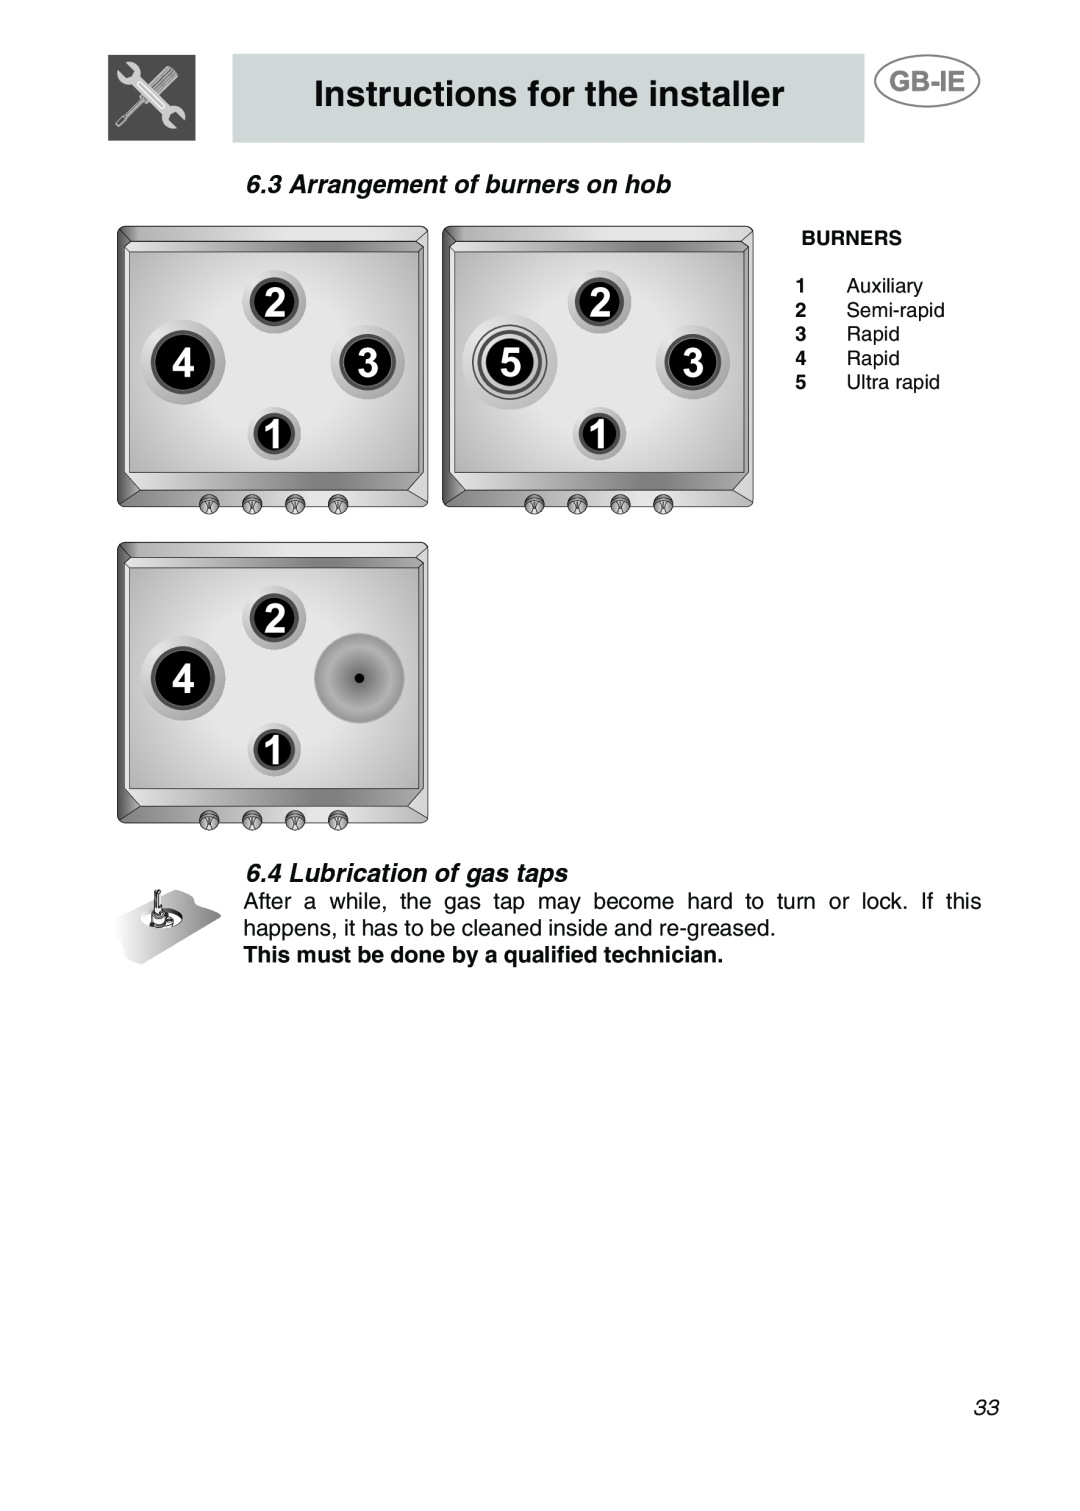 Smeg SDR60XG3 Arrangement of burners on hob, Lubrication of gas taps, Instructions for the installer, Burners, Auxiliary 